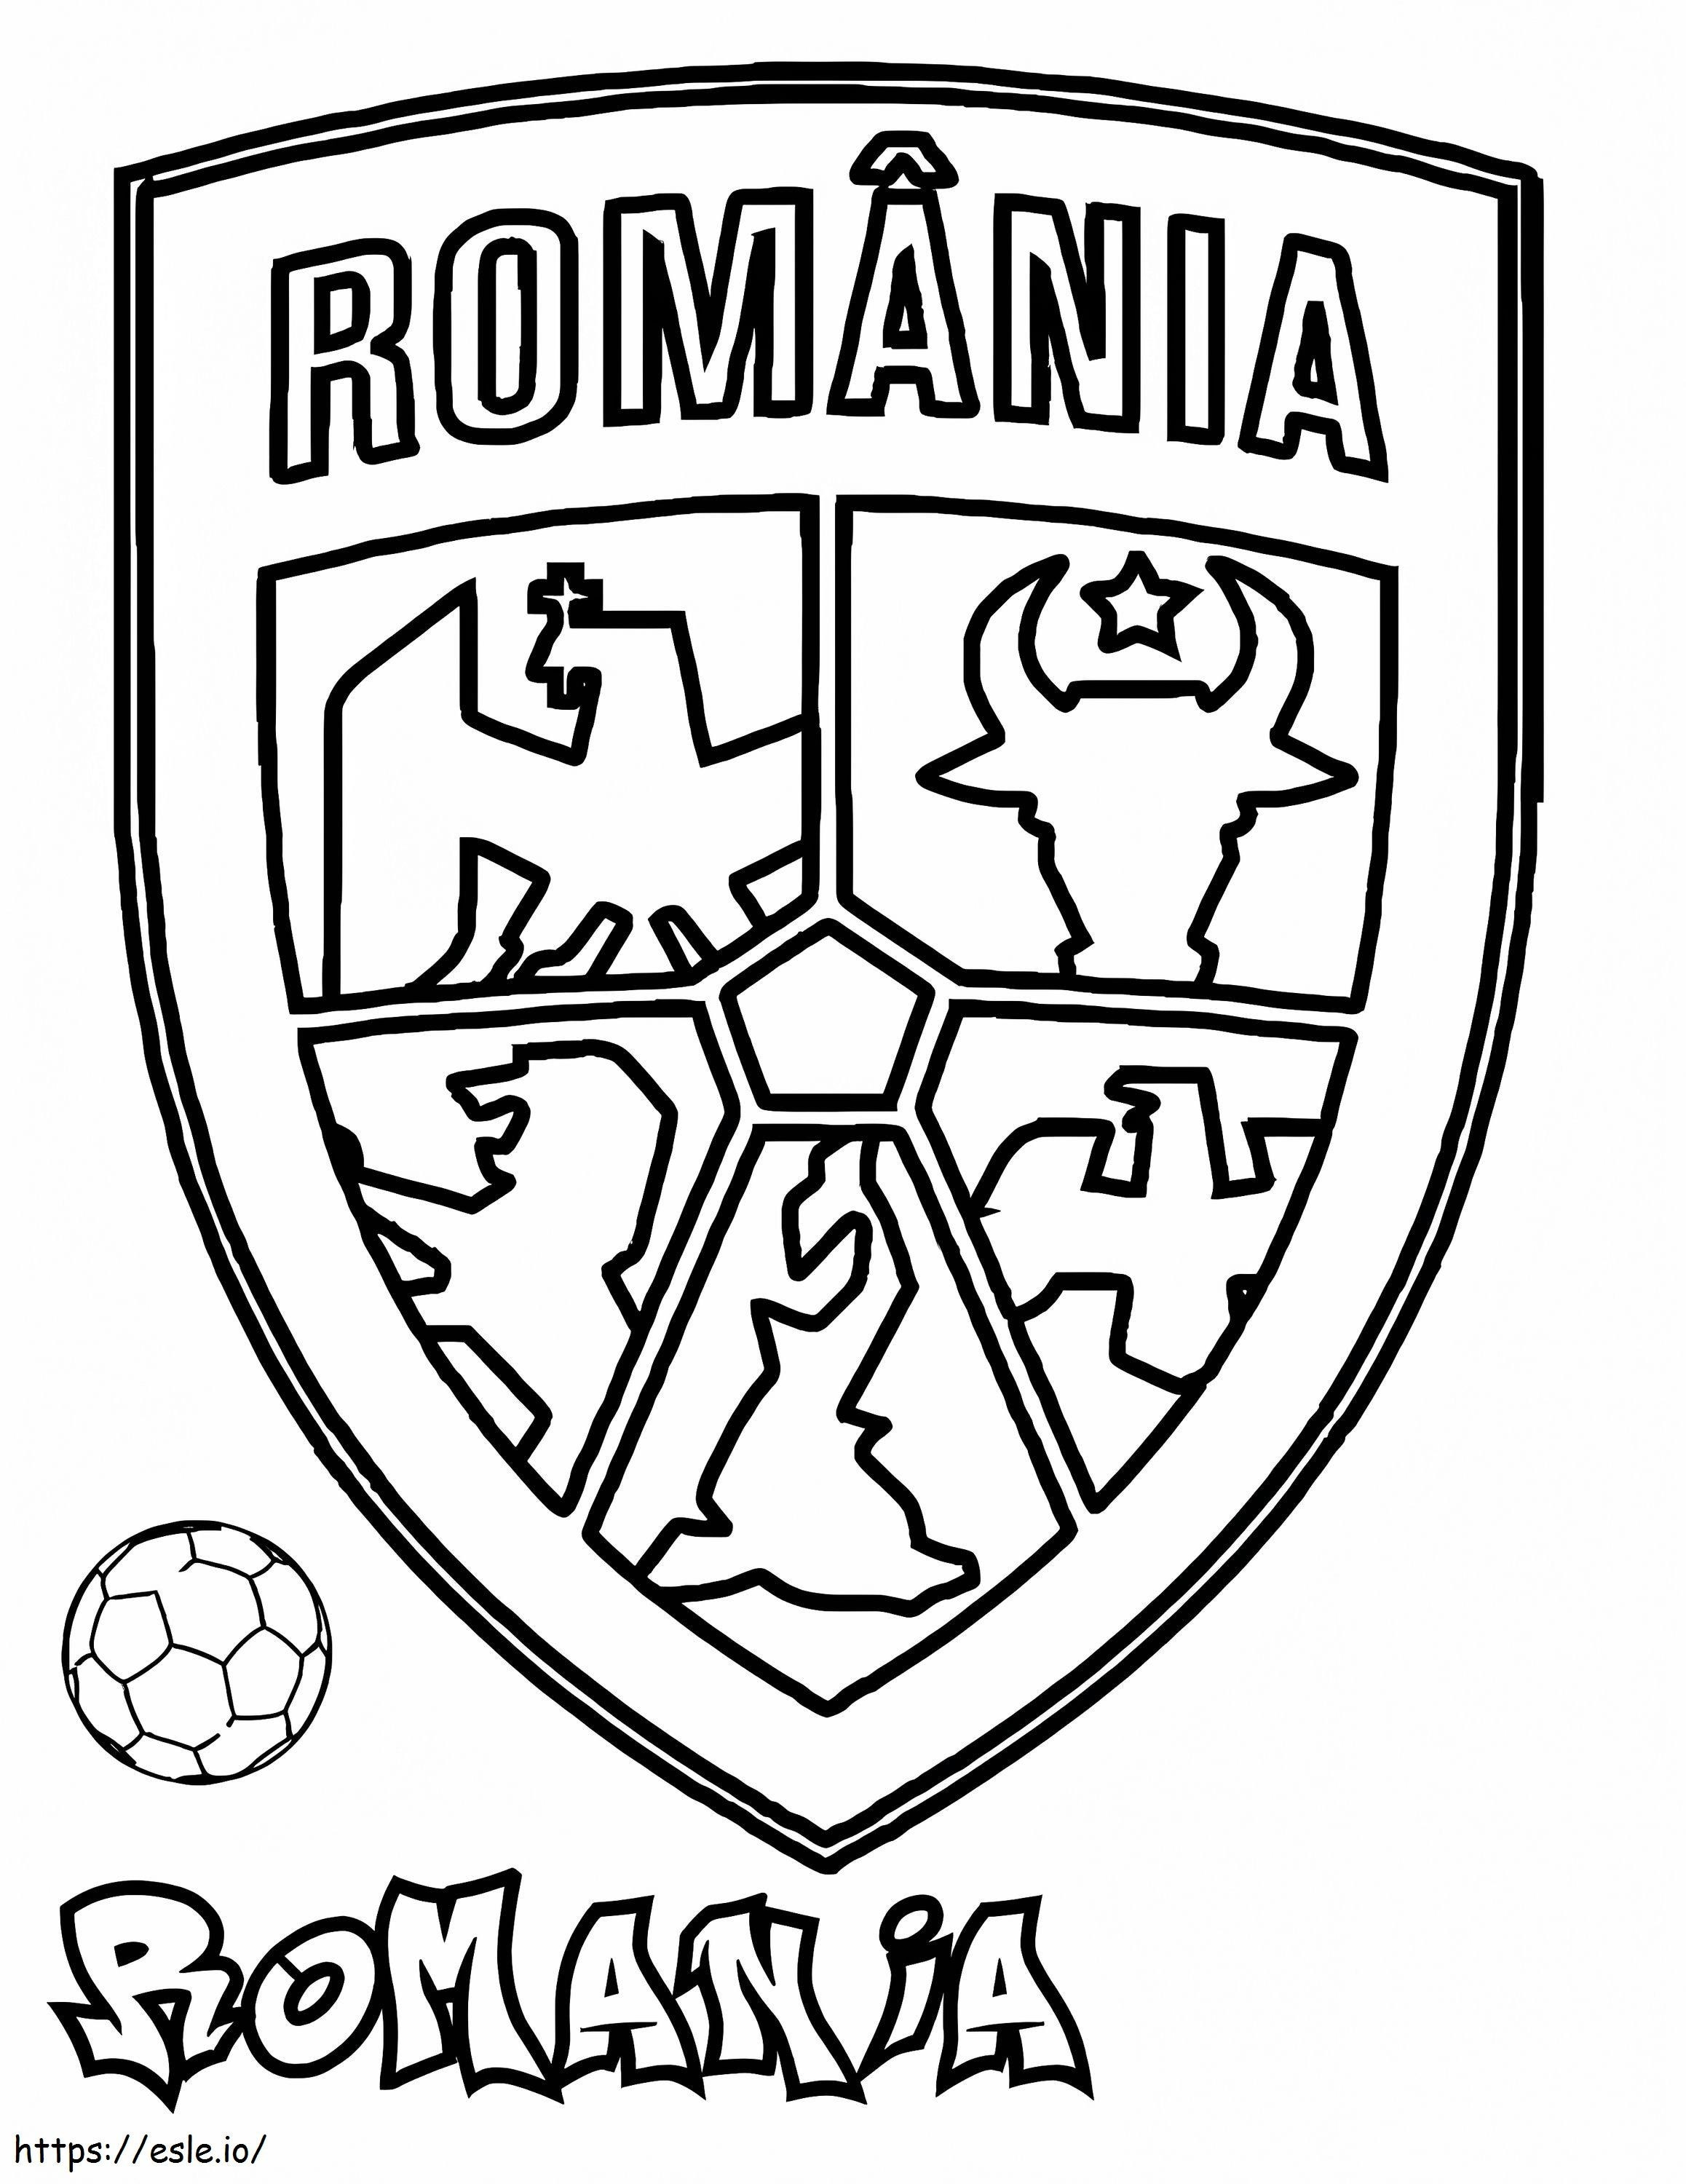 Romania National Football Team coloring page